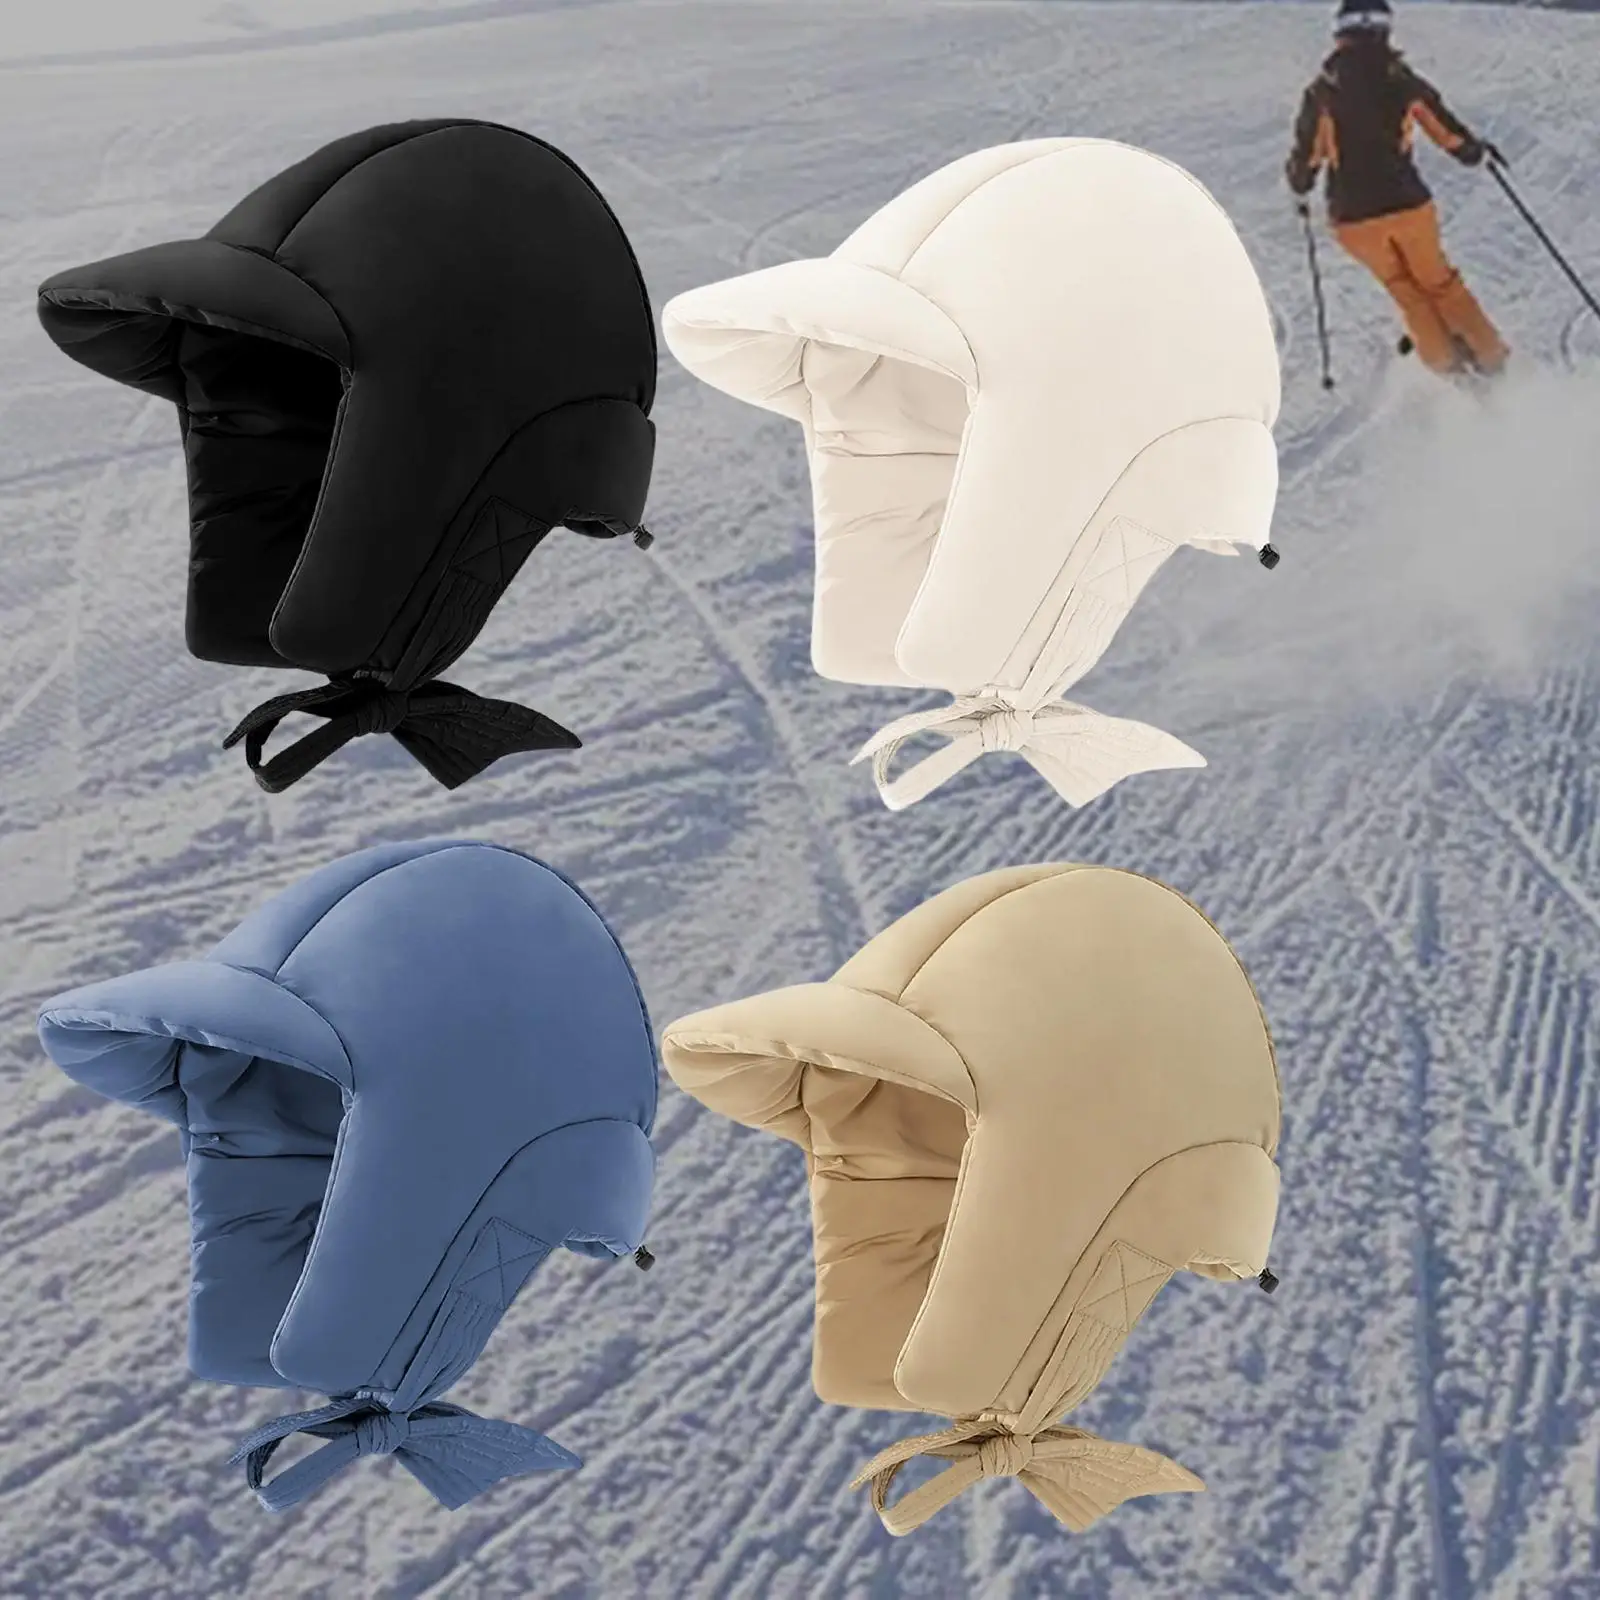 Down Hat with Earflaps Winter Hat Ear Protection Cap Peaked Hat Warm Hat Down Filled Hat for Hiking Camping Snow Sports Skiing